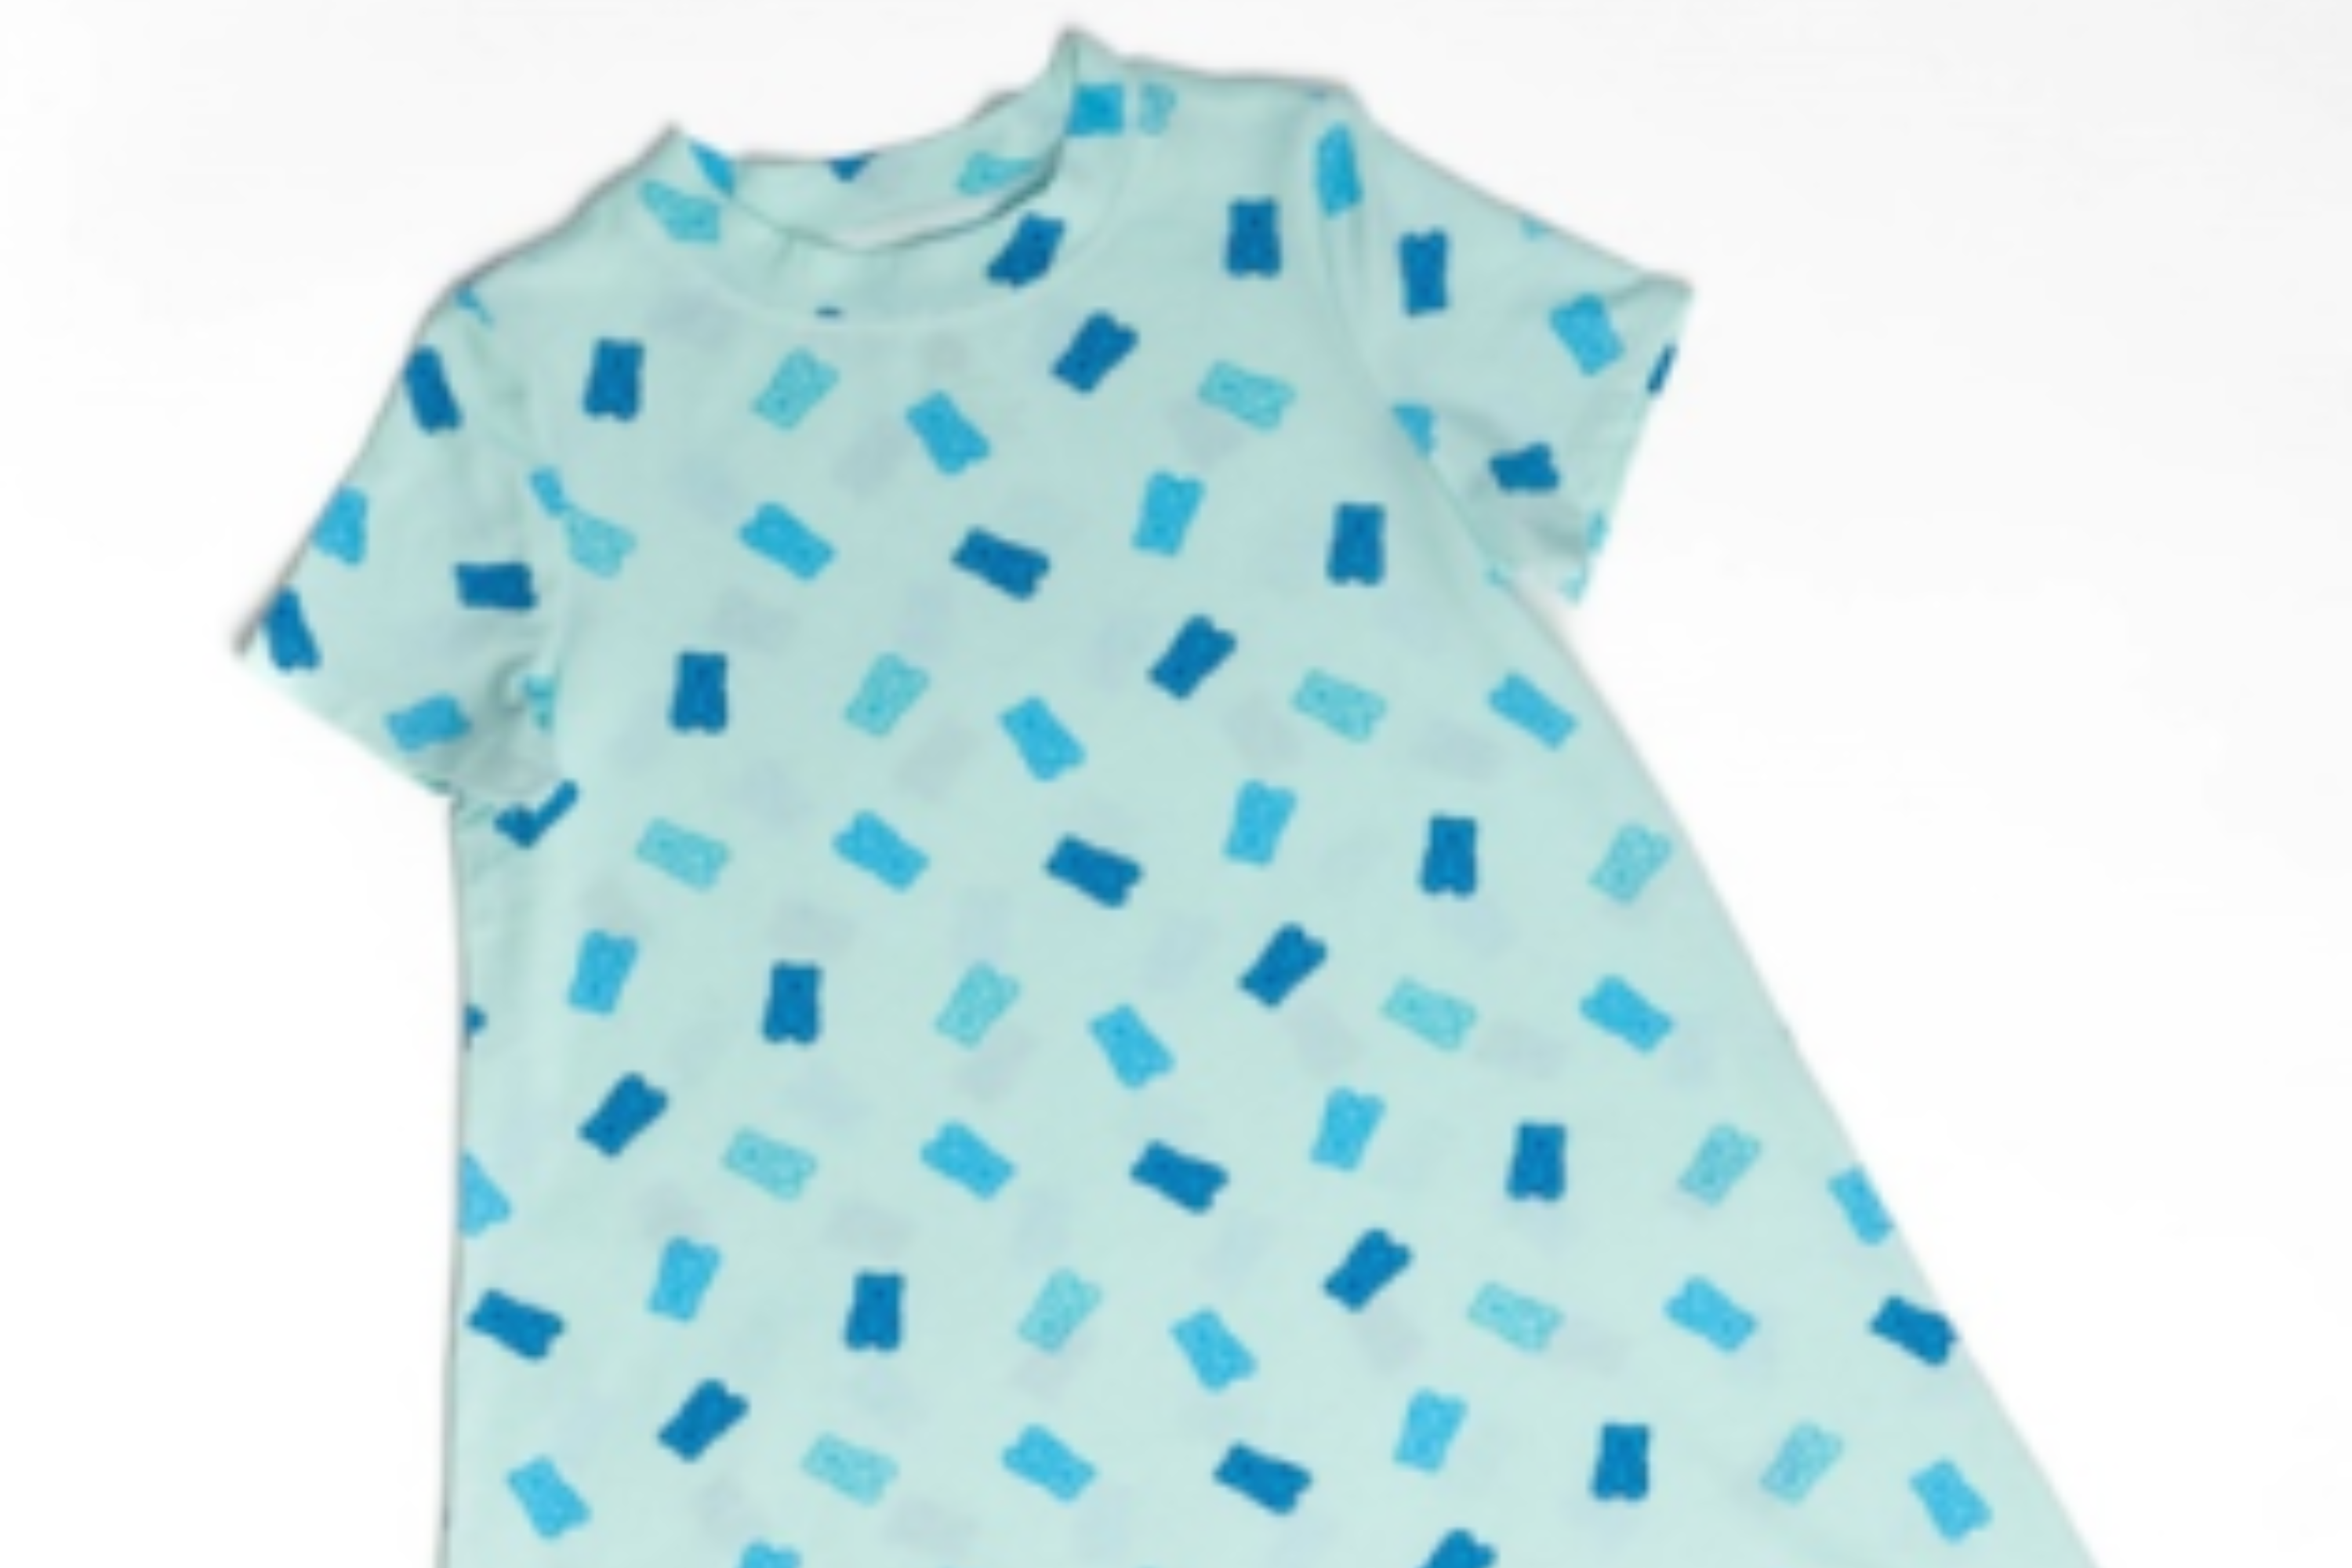 Kid’s clothing recall in 5 states over injury fears